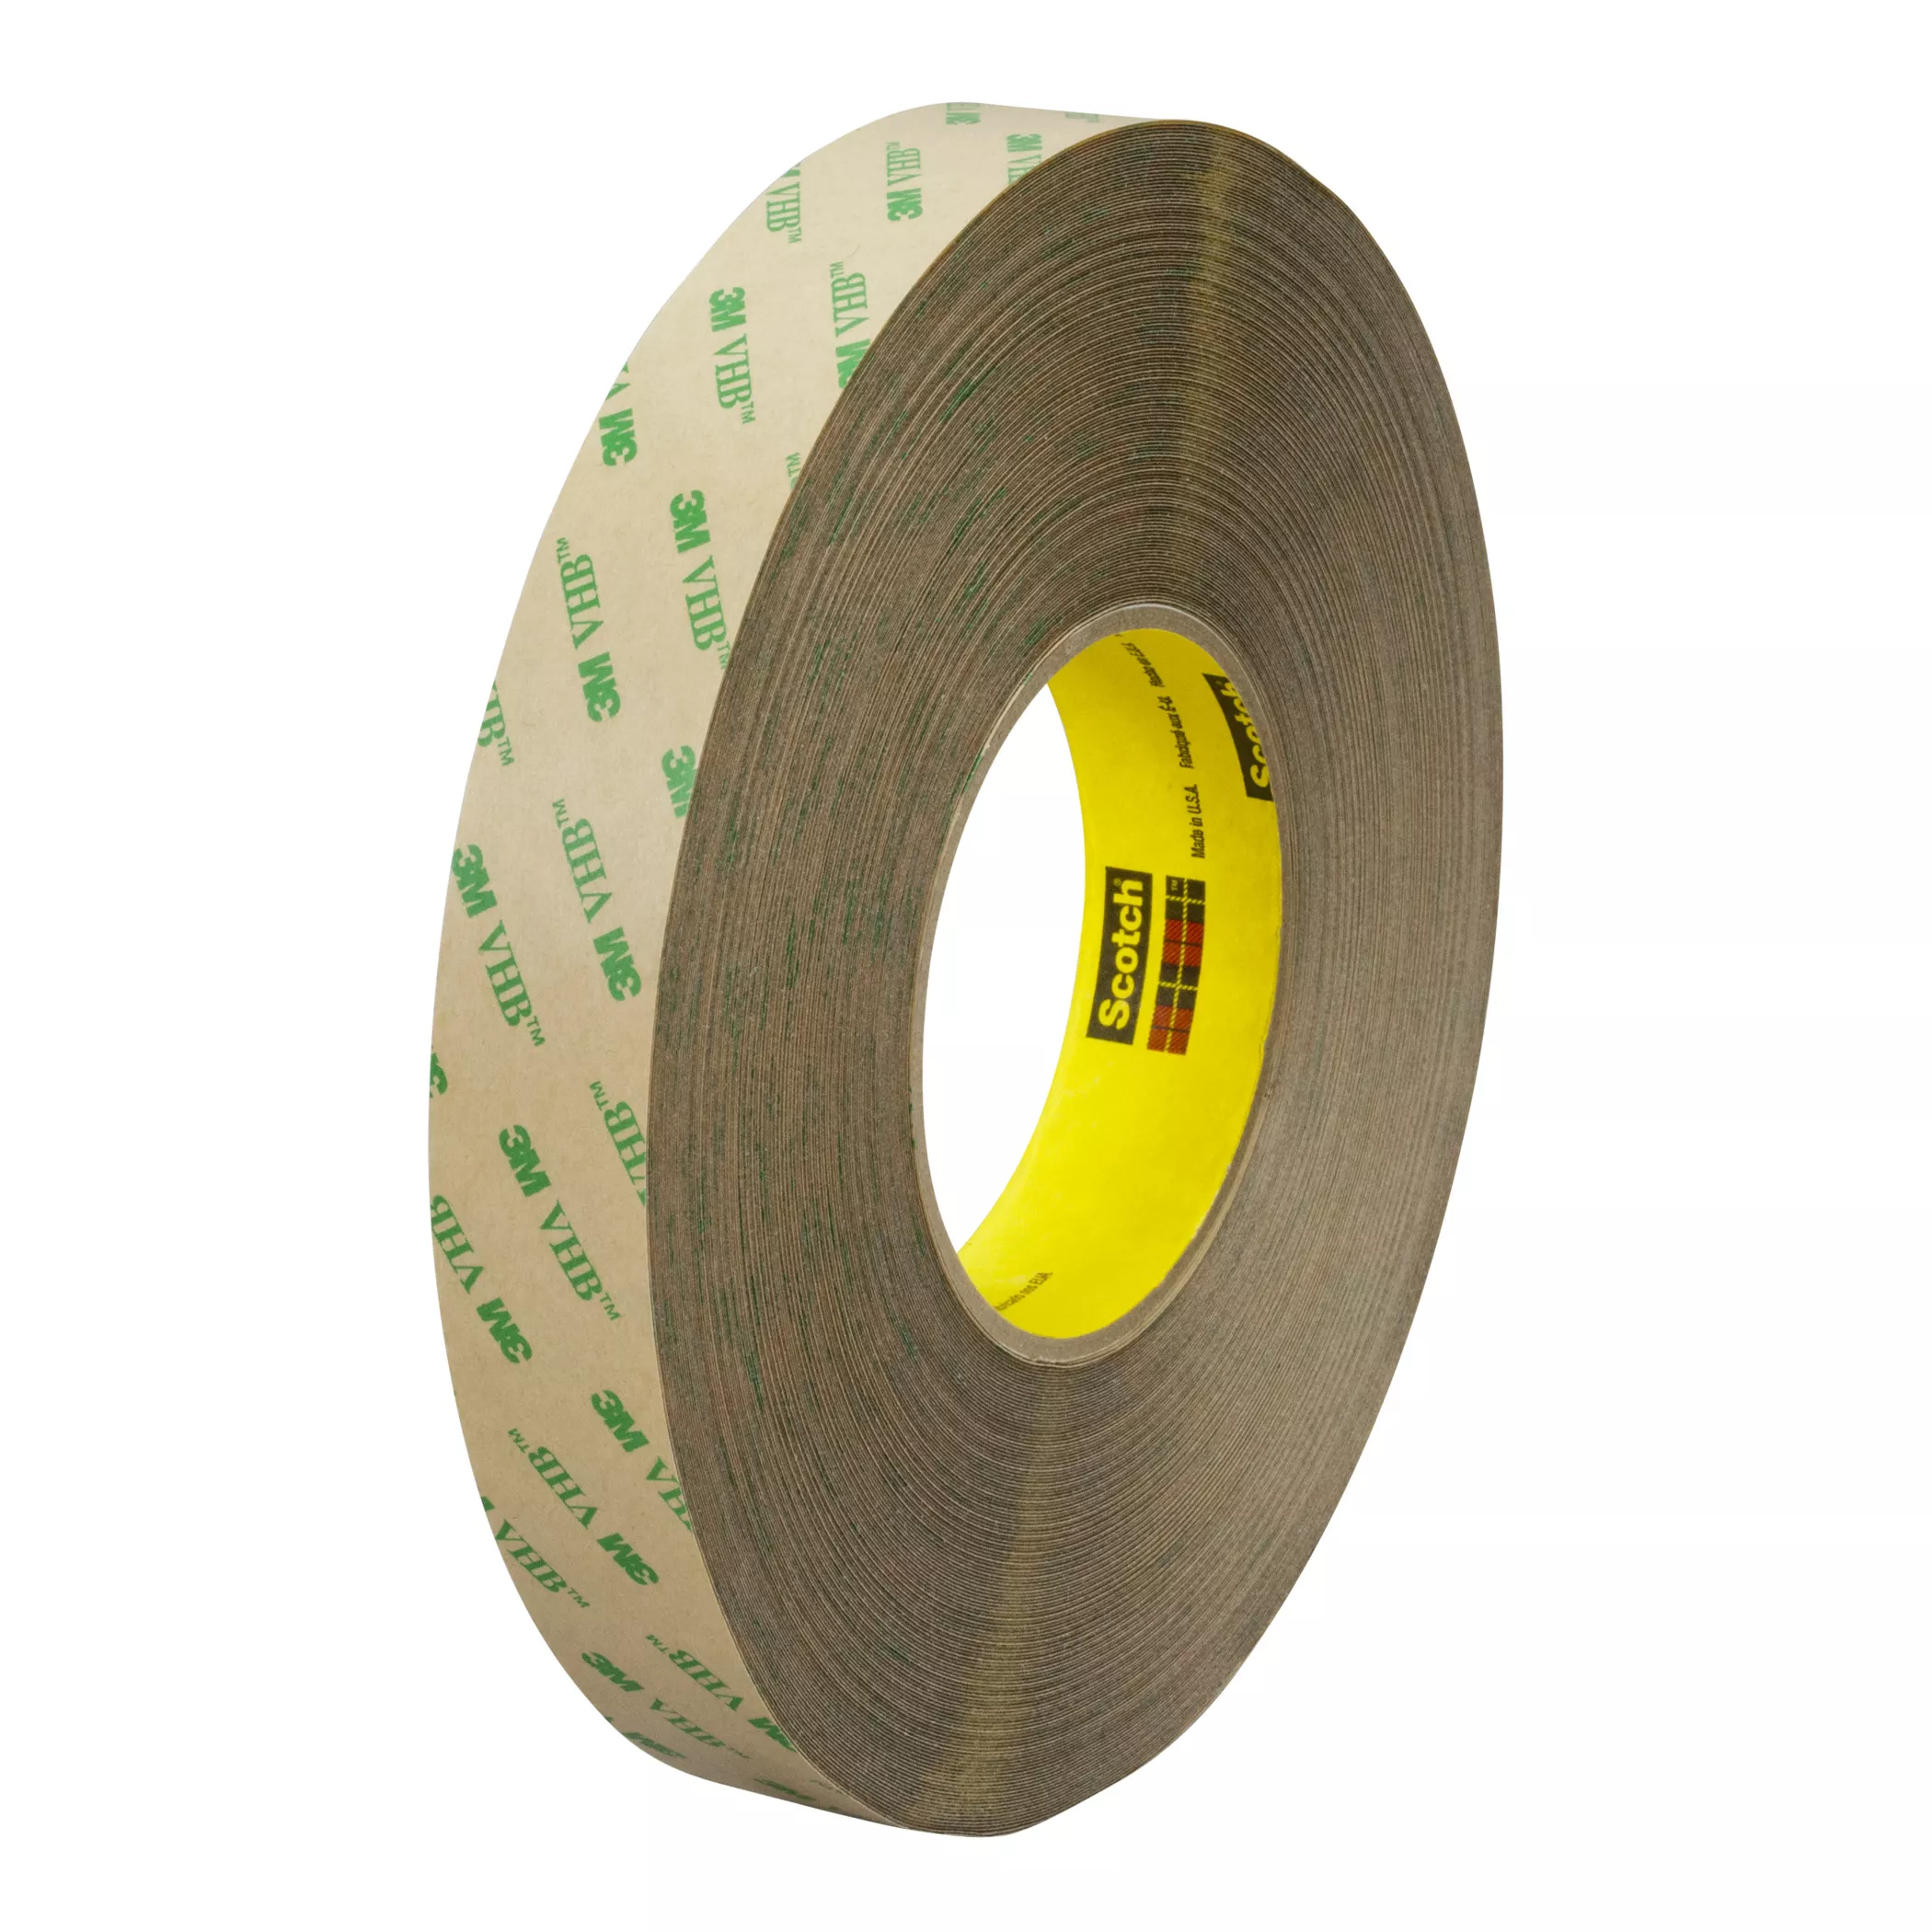 3M™ Adhesive Transfer Tape 9473PC, Clear, 24 in x 60 yd, 10 mil, 1
Roll/Case